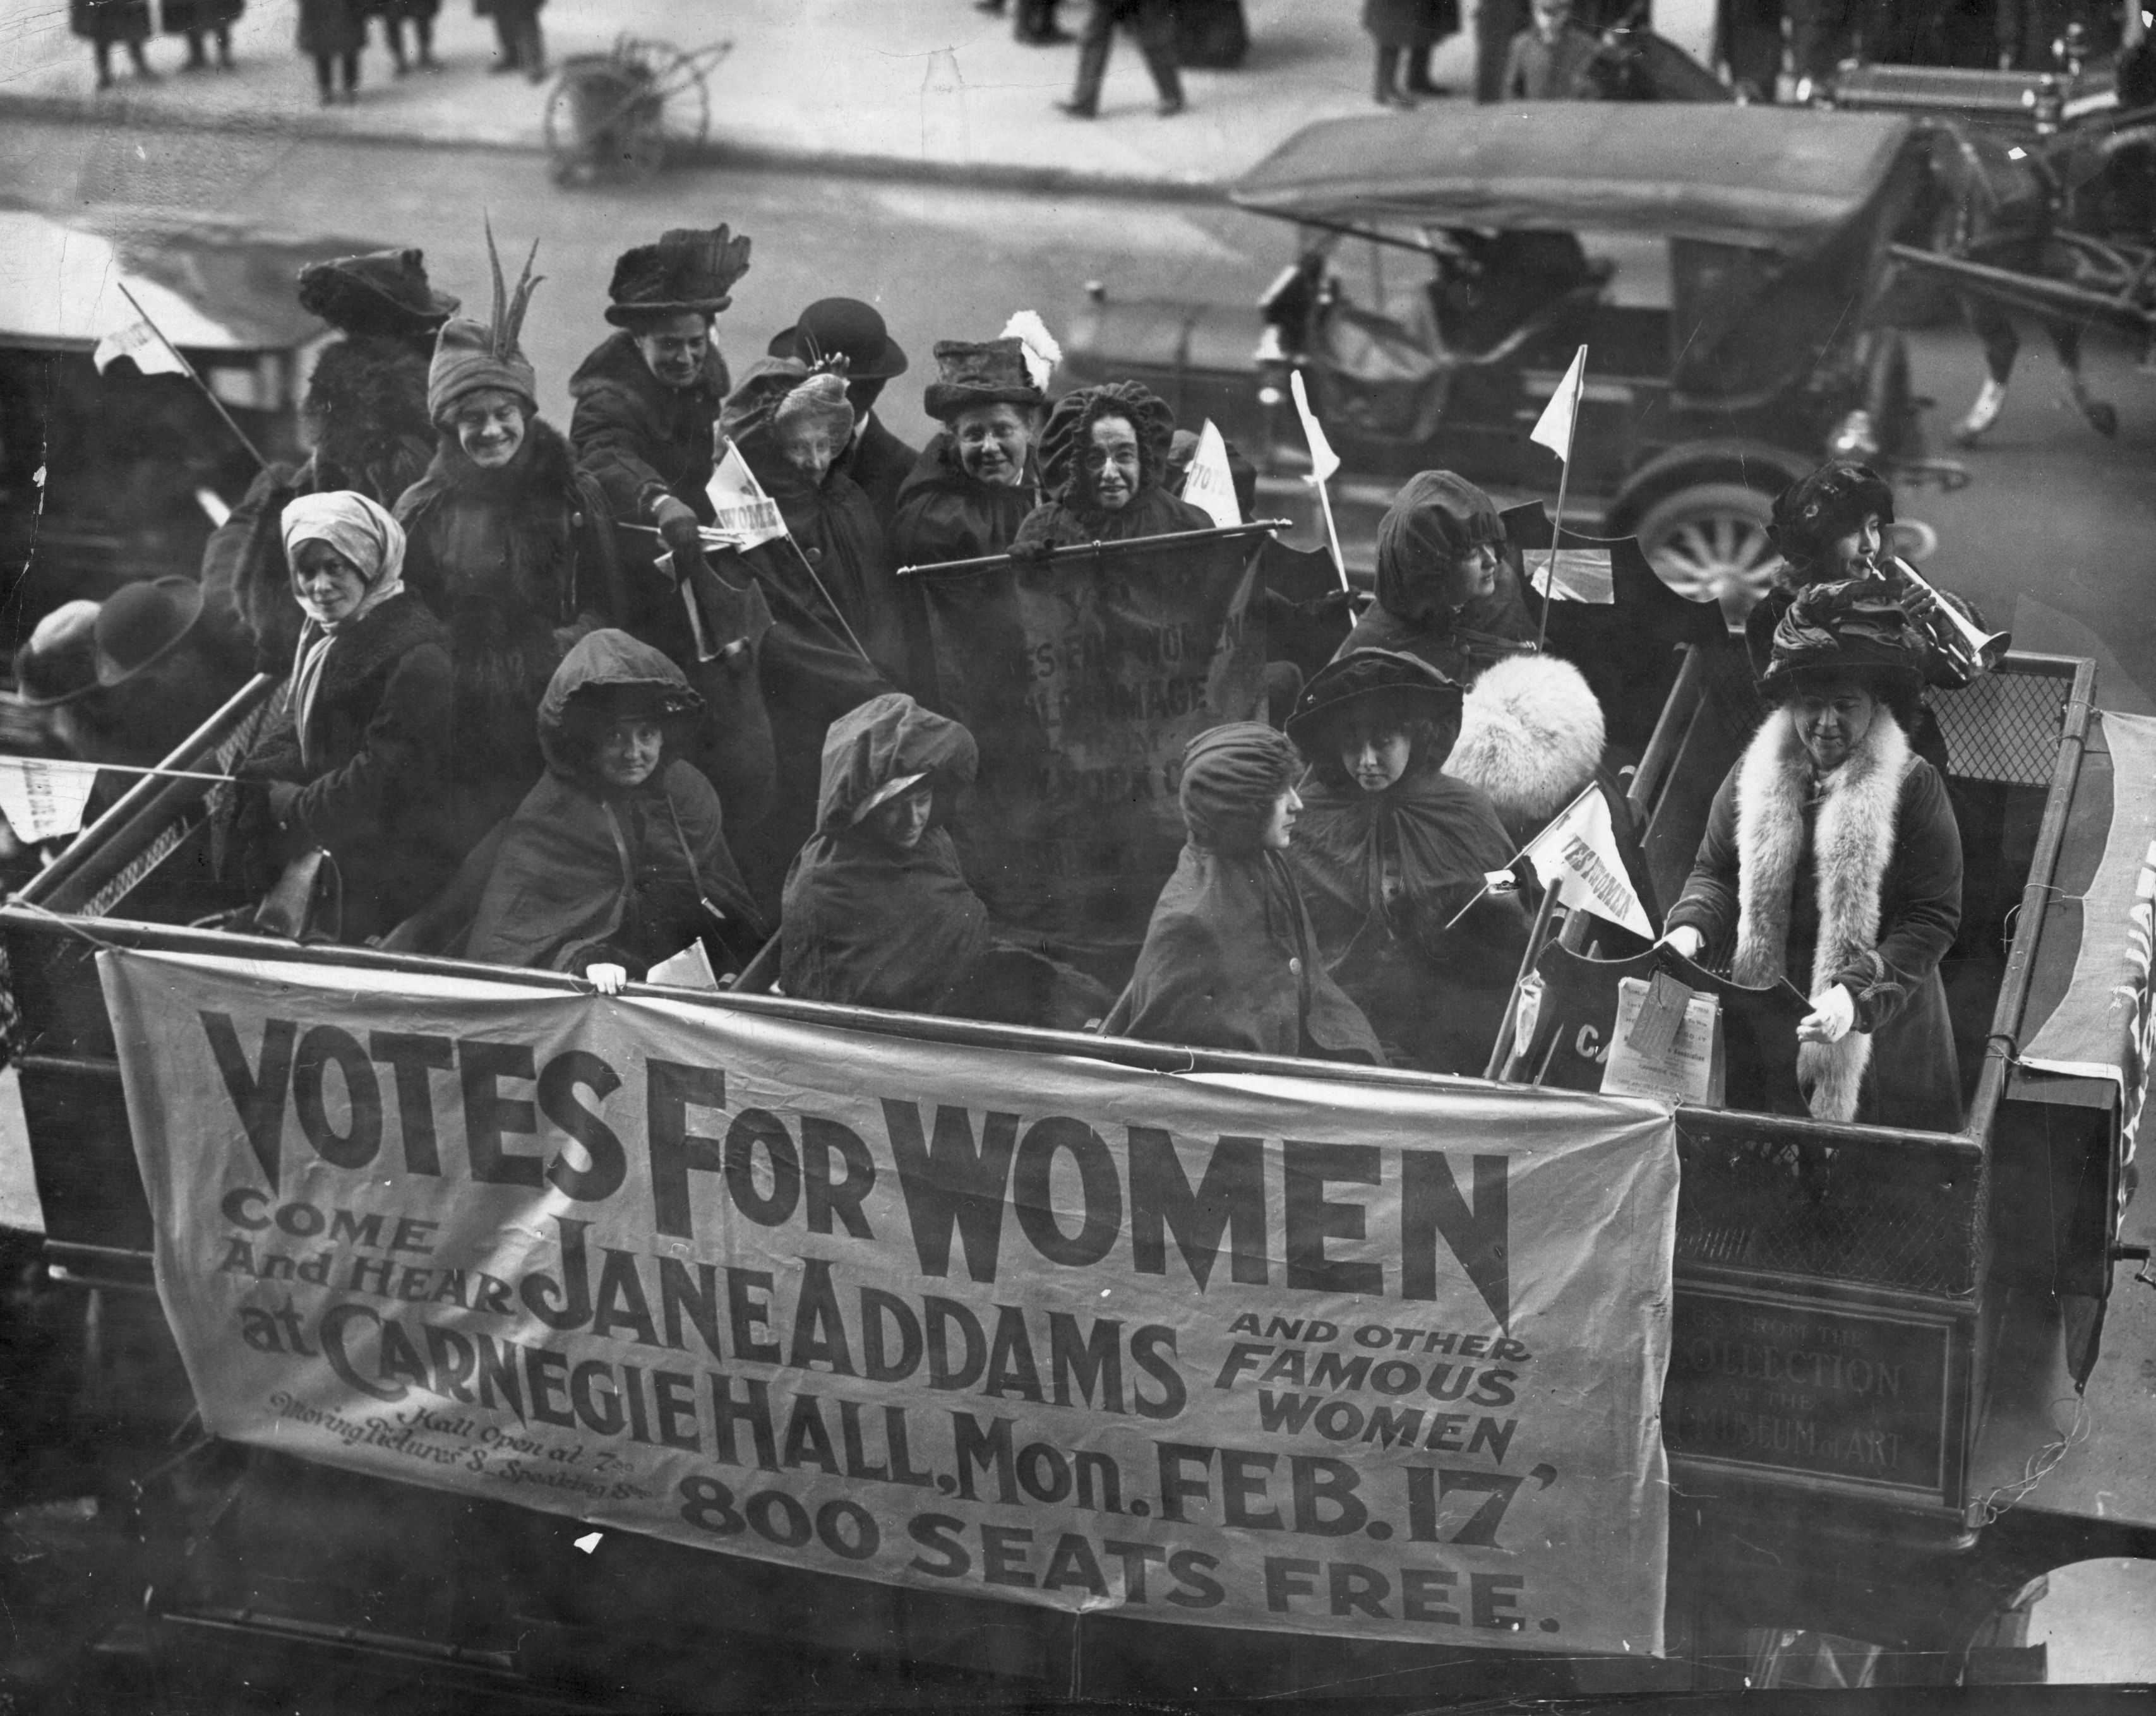 9th February 1913:  A banner advertising a talk on the Women's Suffrage Movement by Jane Addams and others at Carnegie Hall in New York.  (Photo by Paul Thompson/Topical Press Agency/Getty Images) (Paul Thompson&mdash;Getty Images)